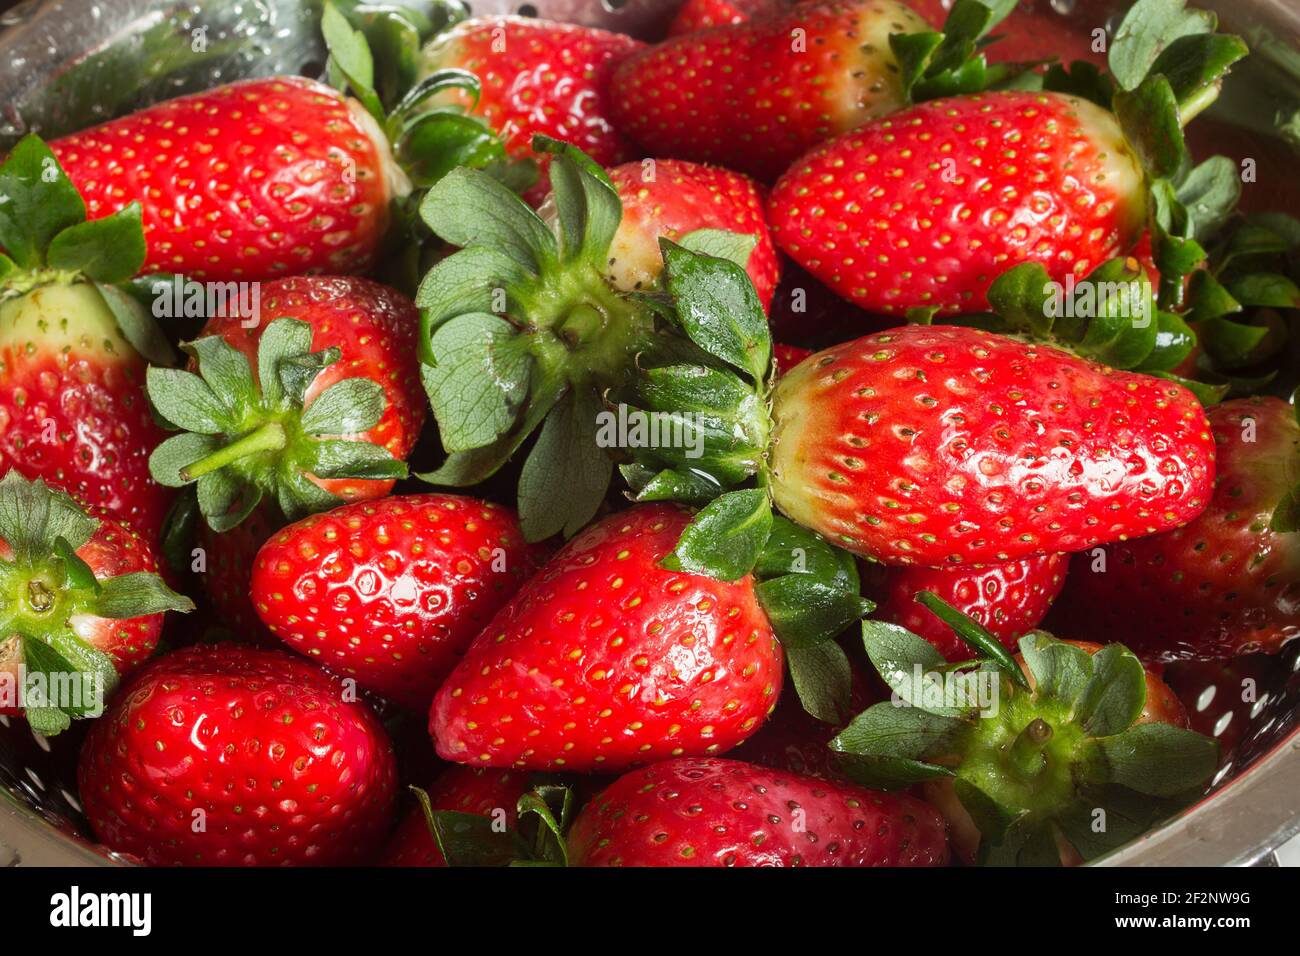 Close-up of lots of freshly washed strawberries in a micro-perforated metal colander. Wash fruit and healthy eating. Stock Photo